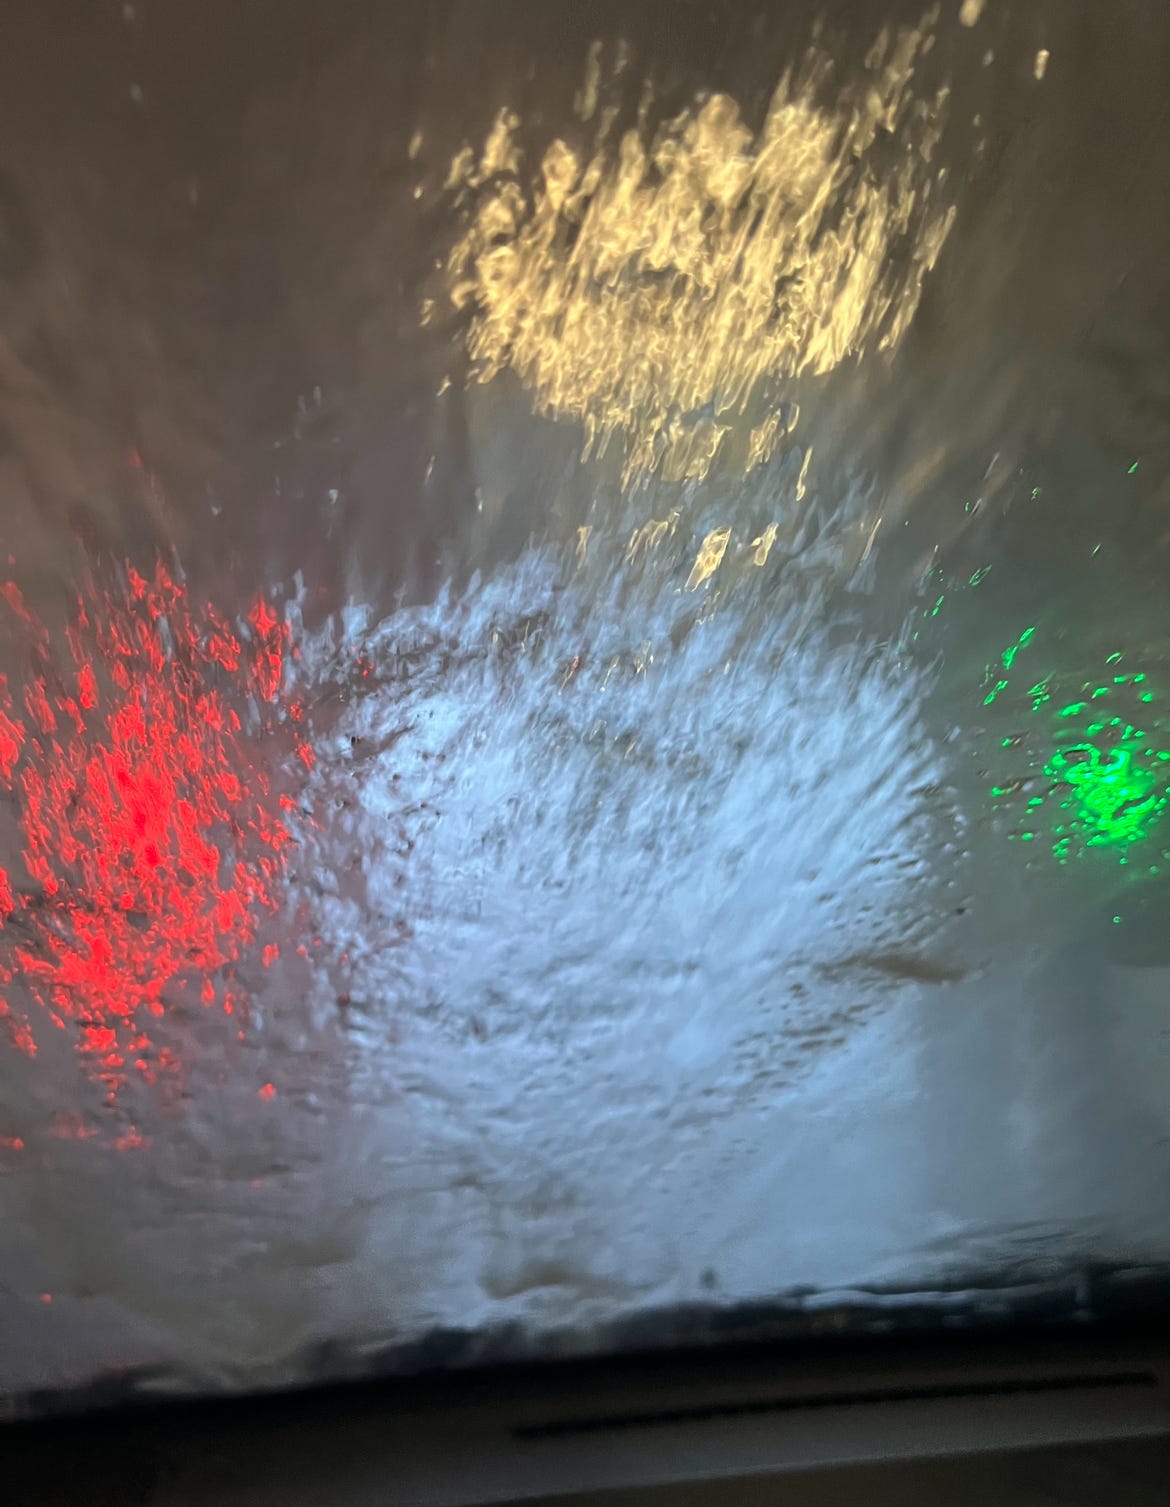 The inside of my van's winshield while we're getting a car wash